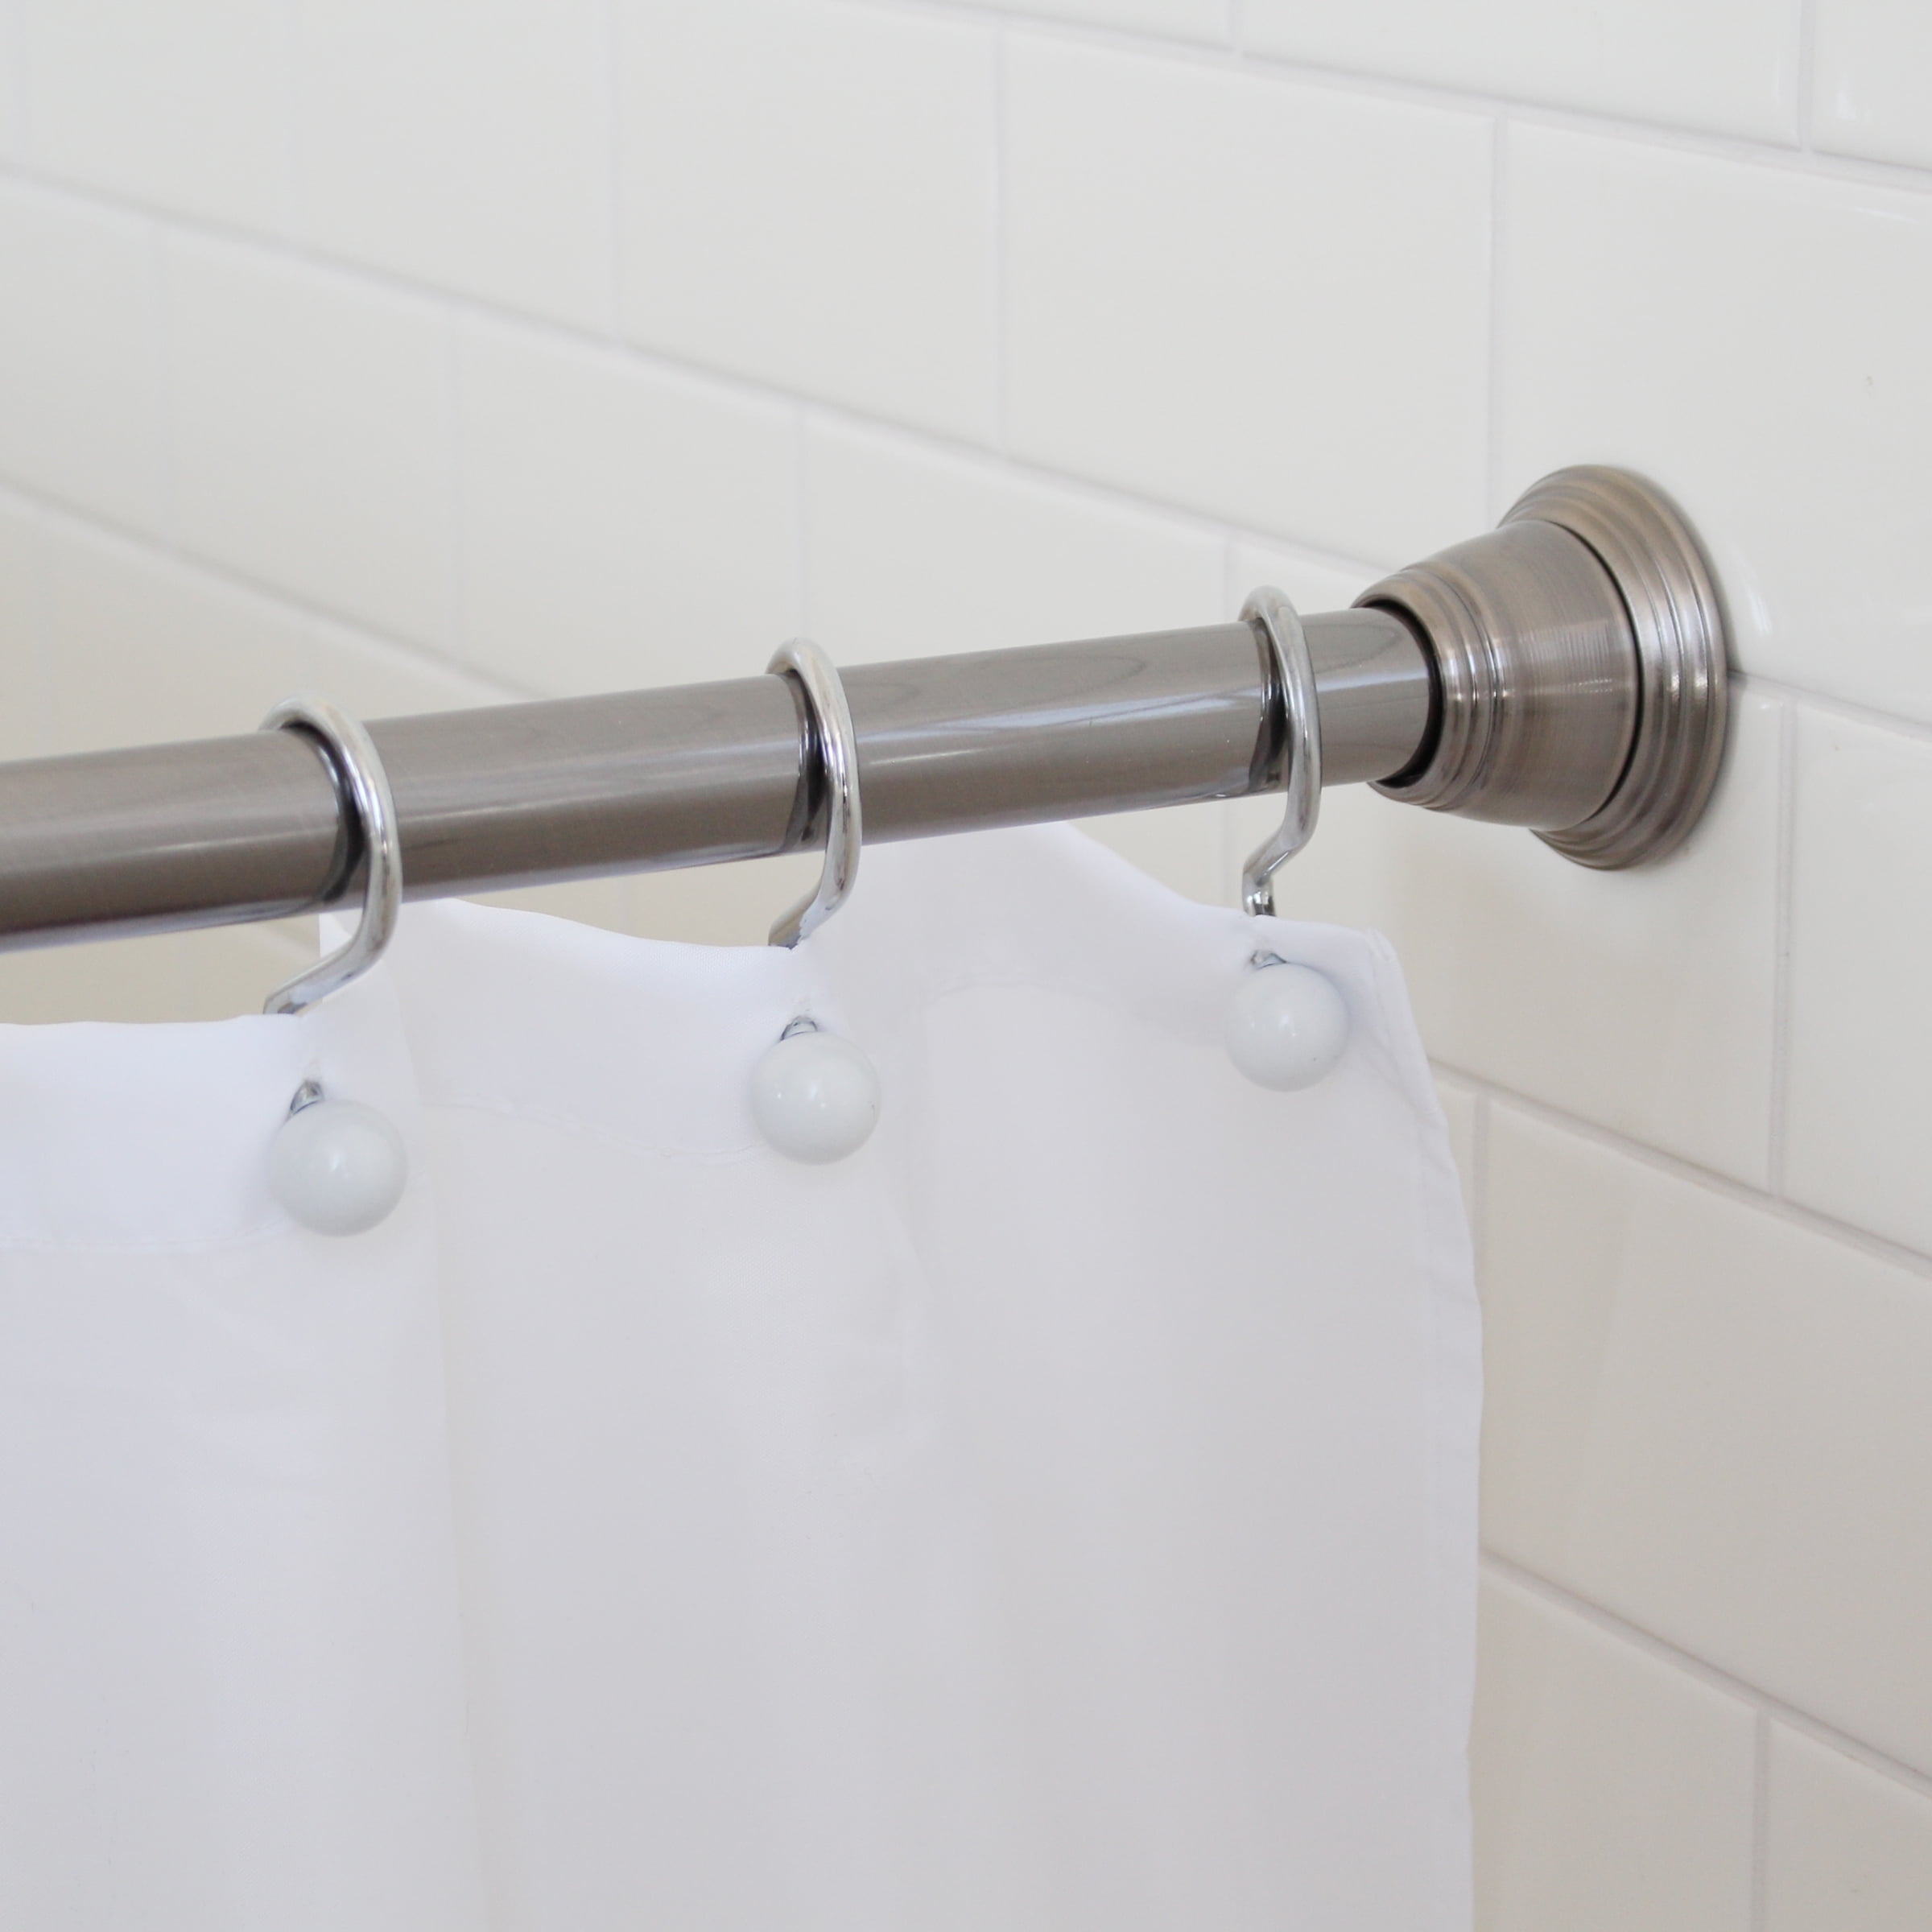 Splash Home Eire Rust Resistant Strong, How To Remove Shower Curtain Tension Rod